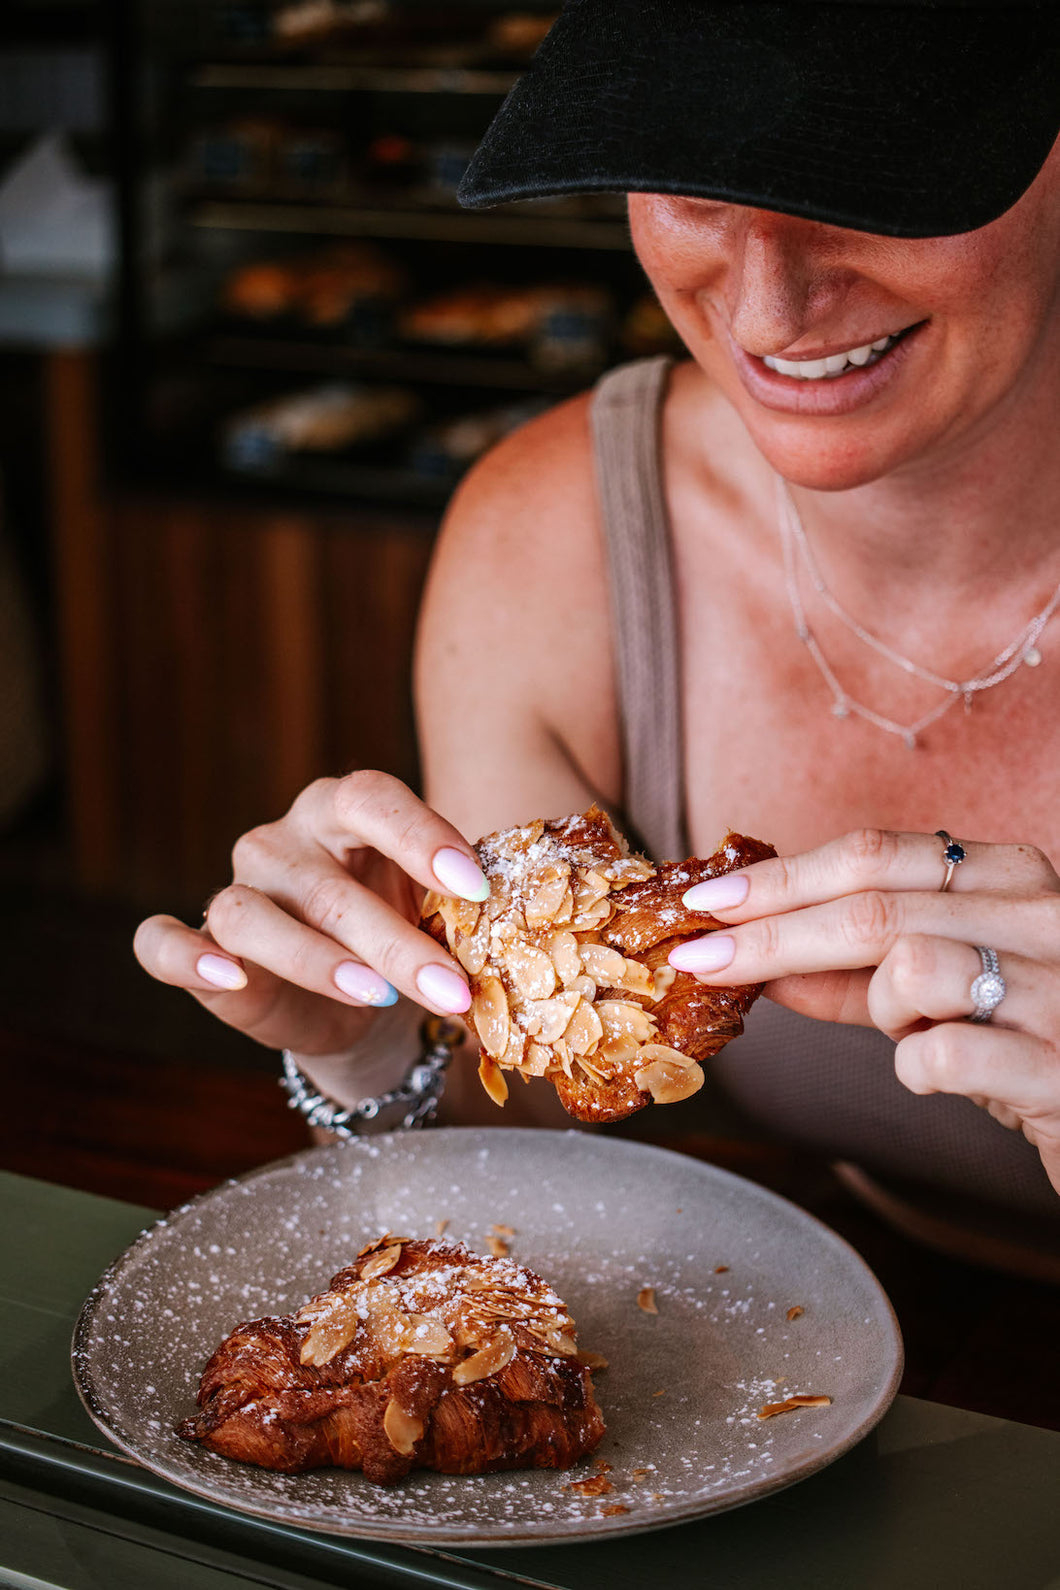 Twice baked Almond Croissant